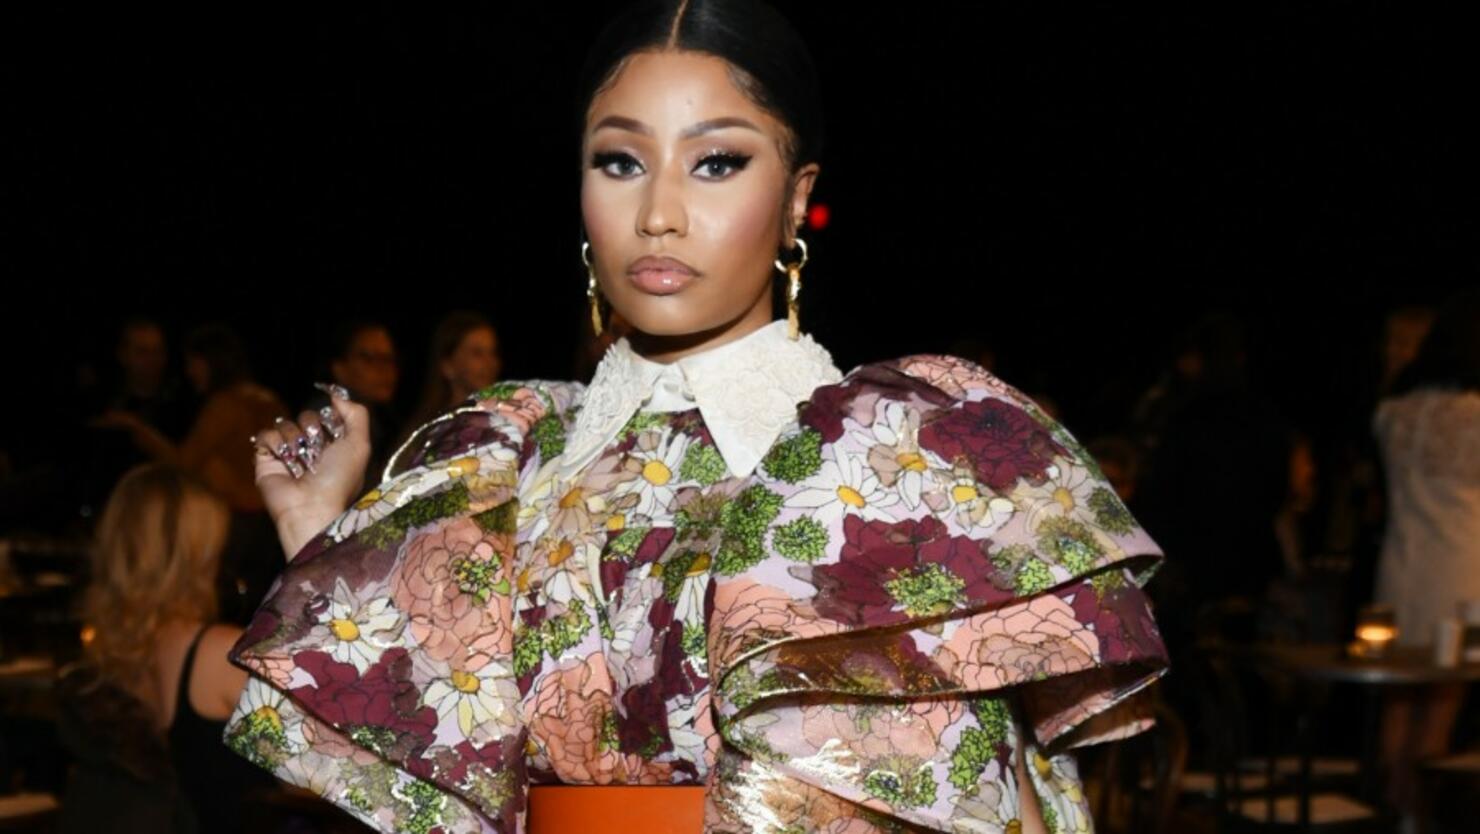 Nicki Minaj's Baby Gifts: Gets Burberry Clothes For Infant